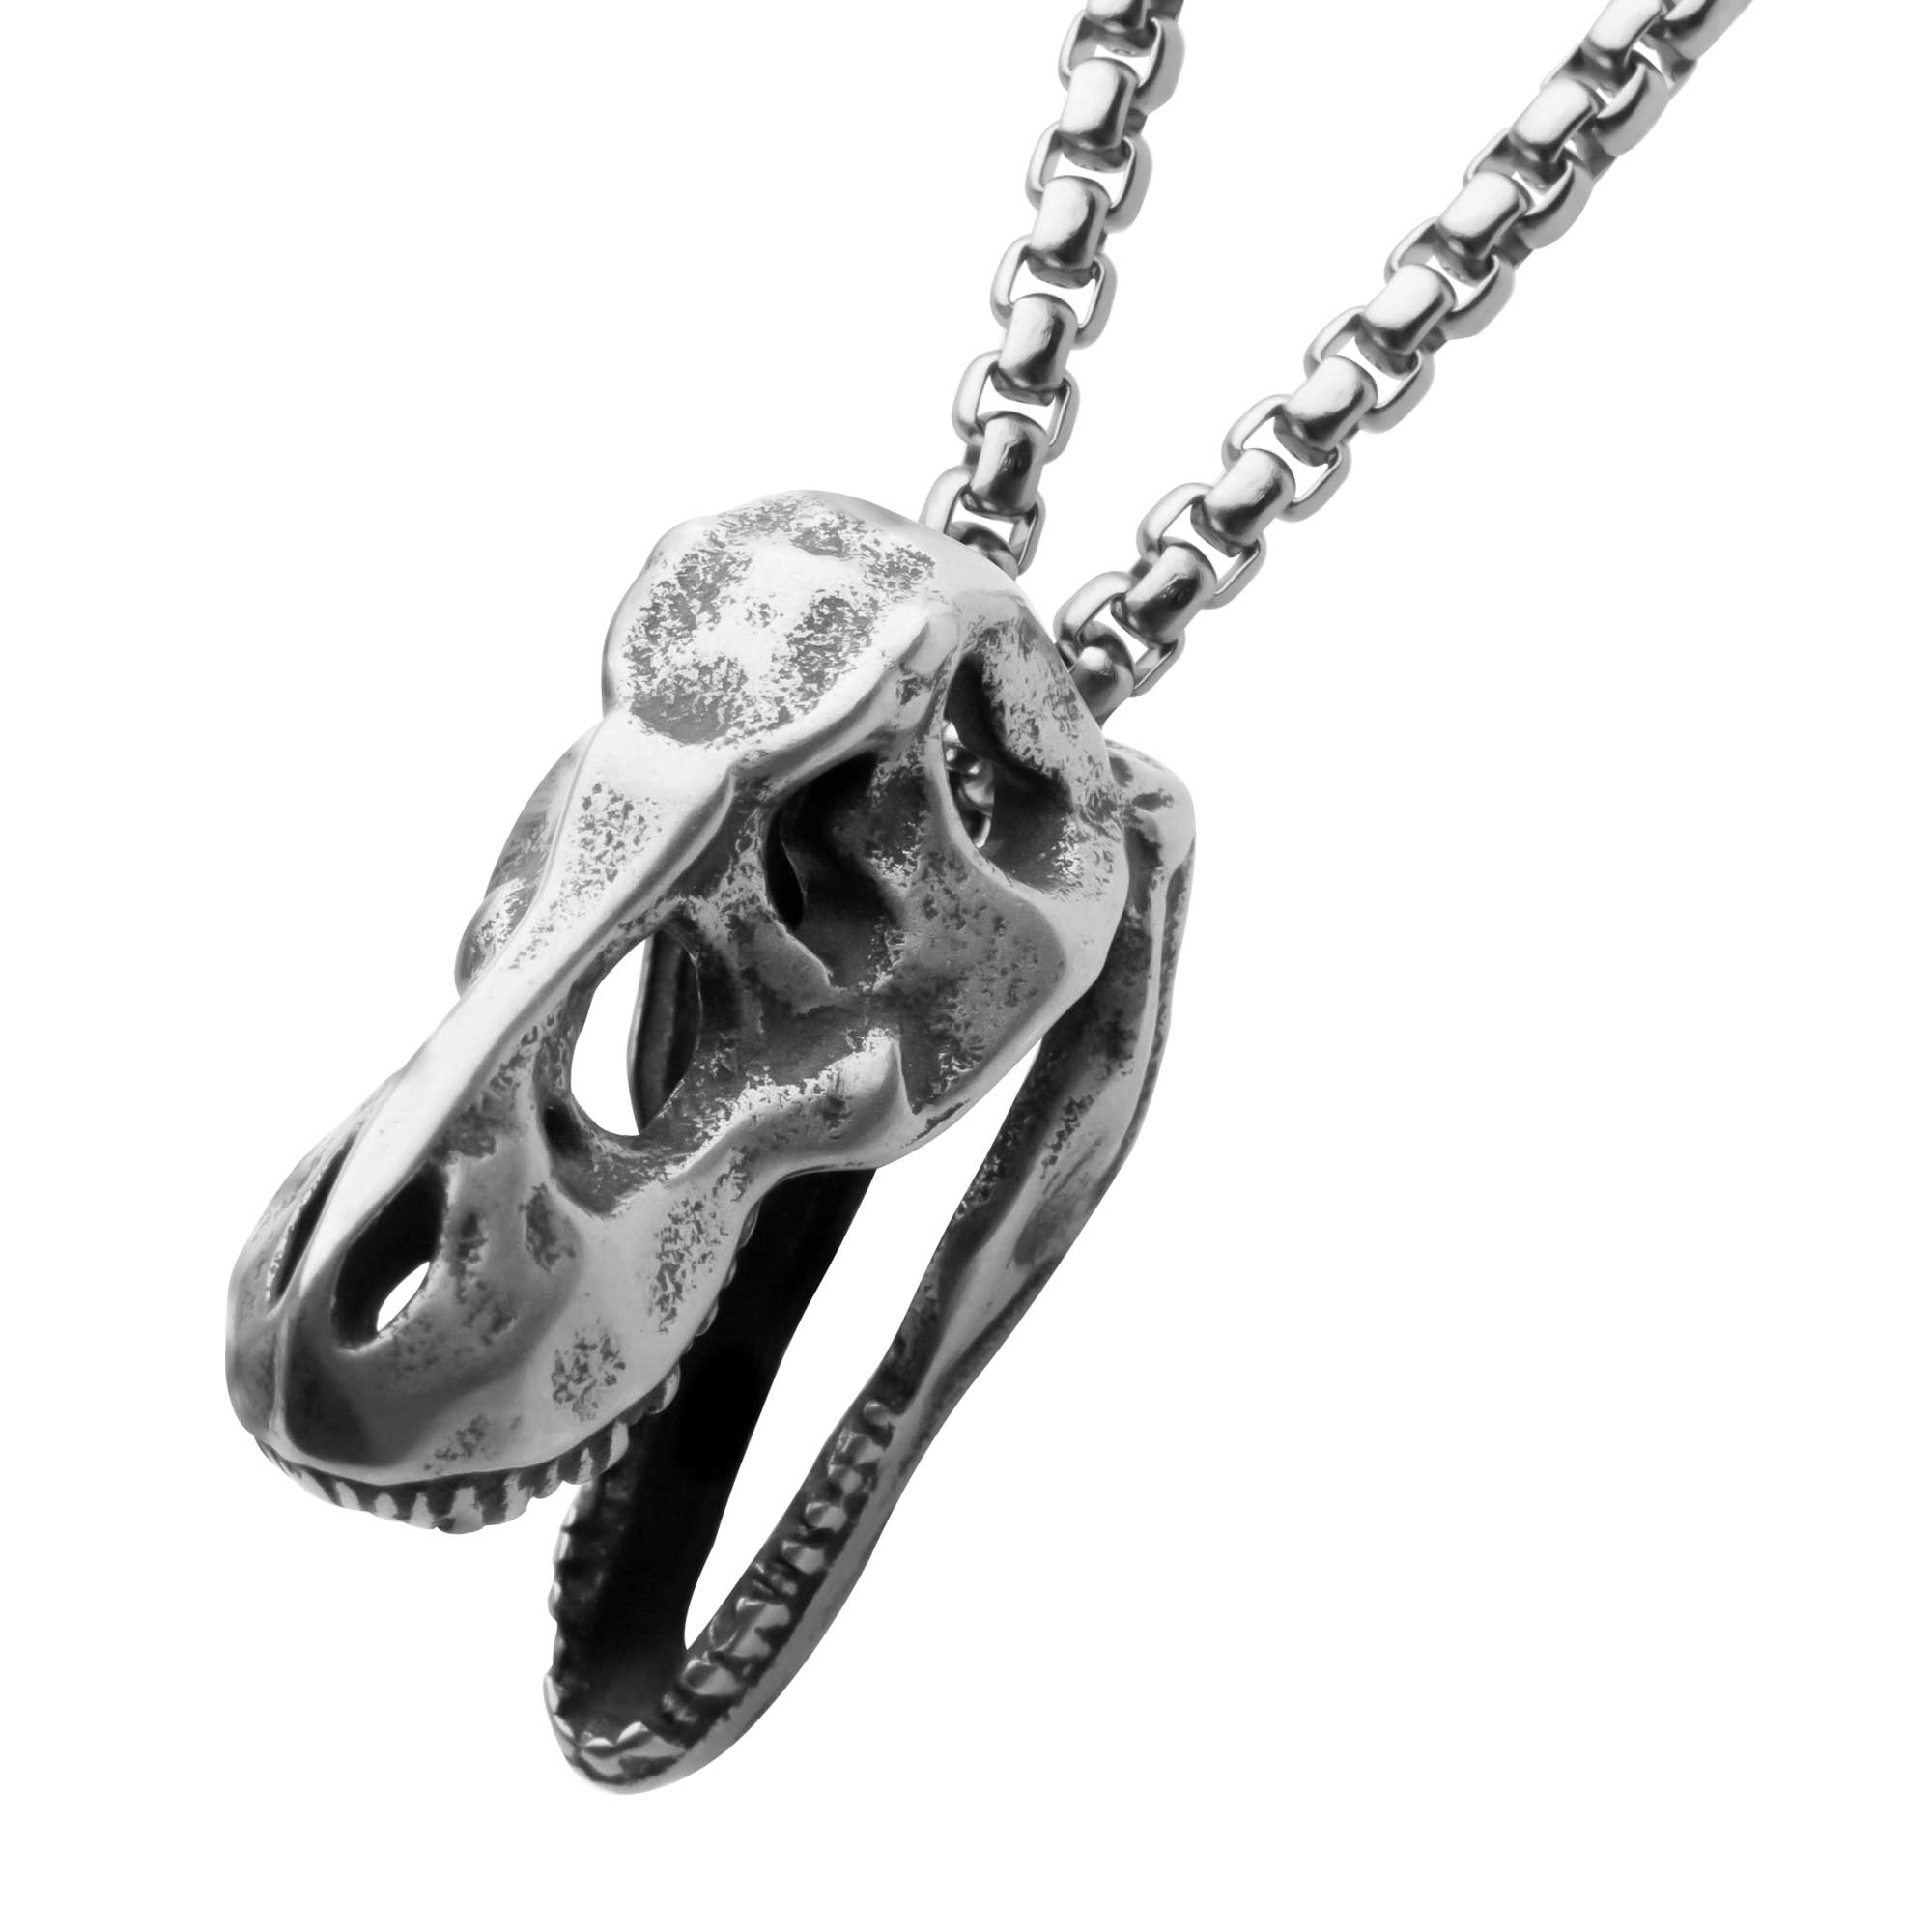 Distressed Matte Steel T-Rex Skull Pendant with Chain Morin Jewelers Southbridge, MA